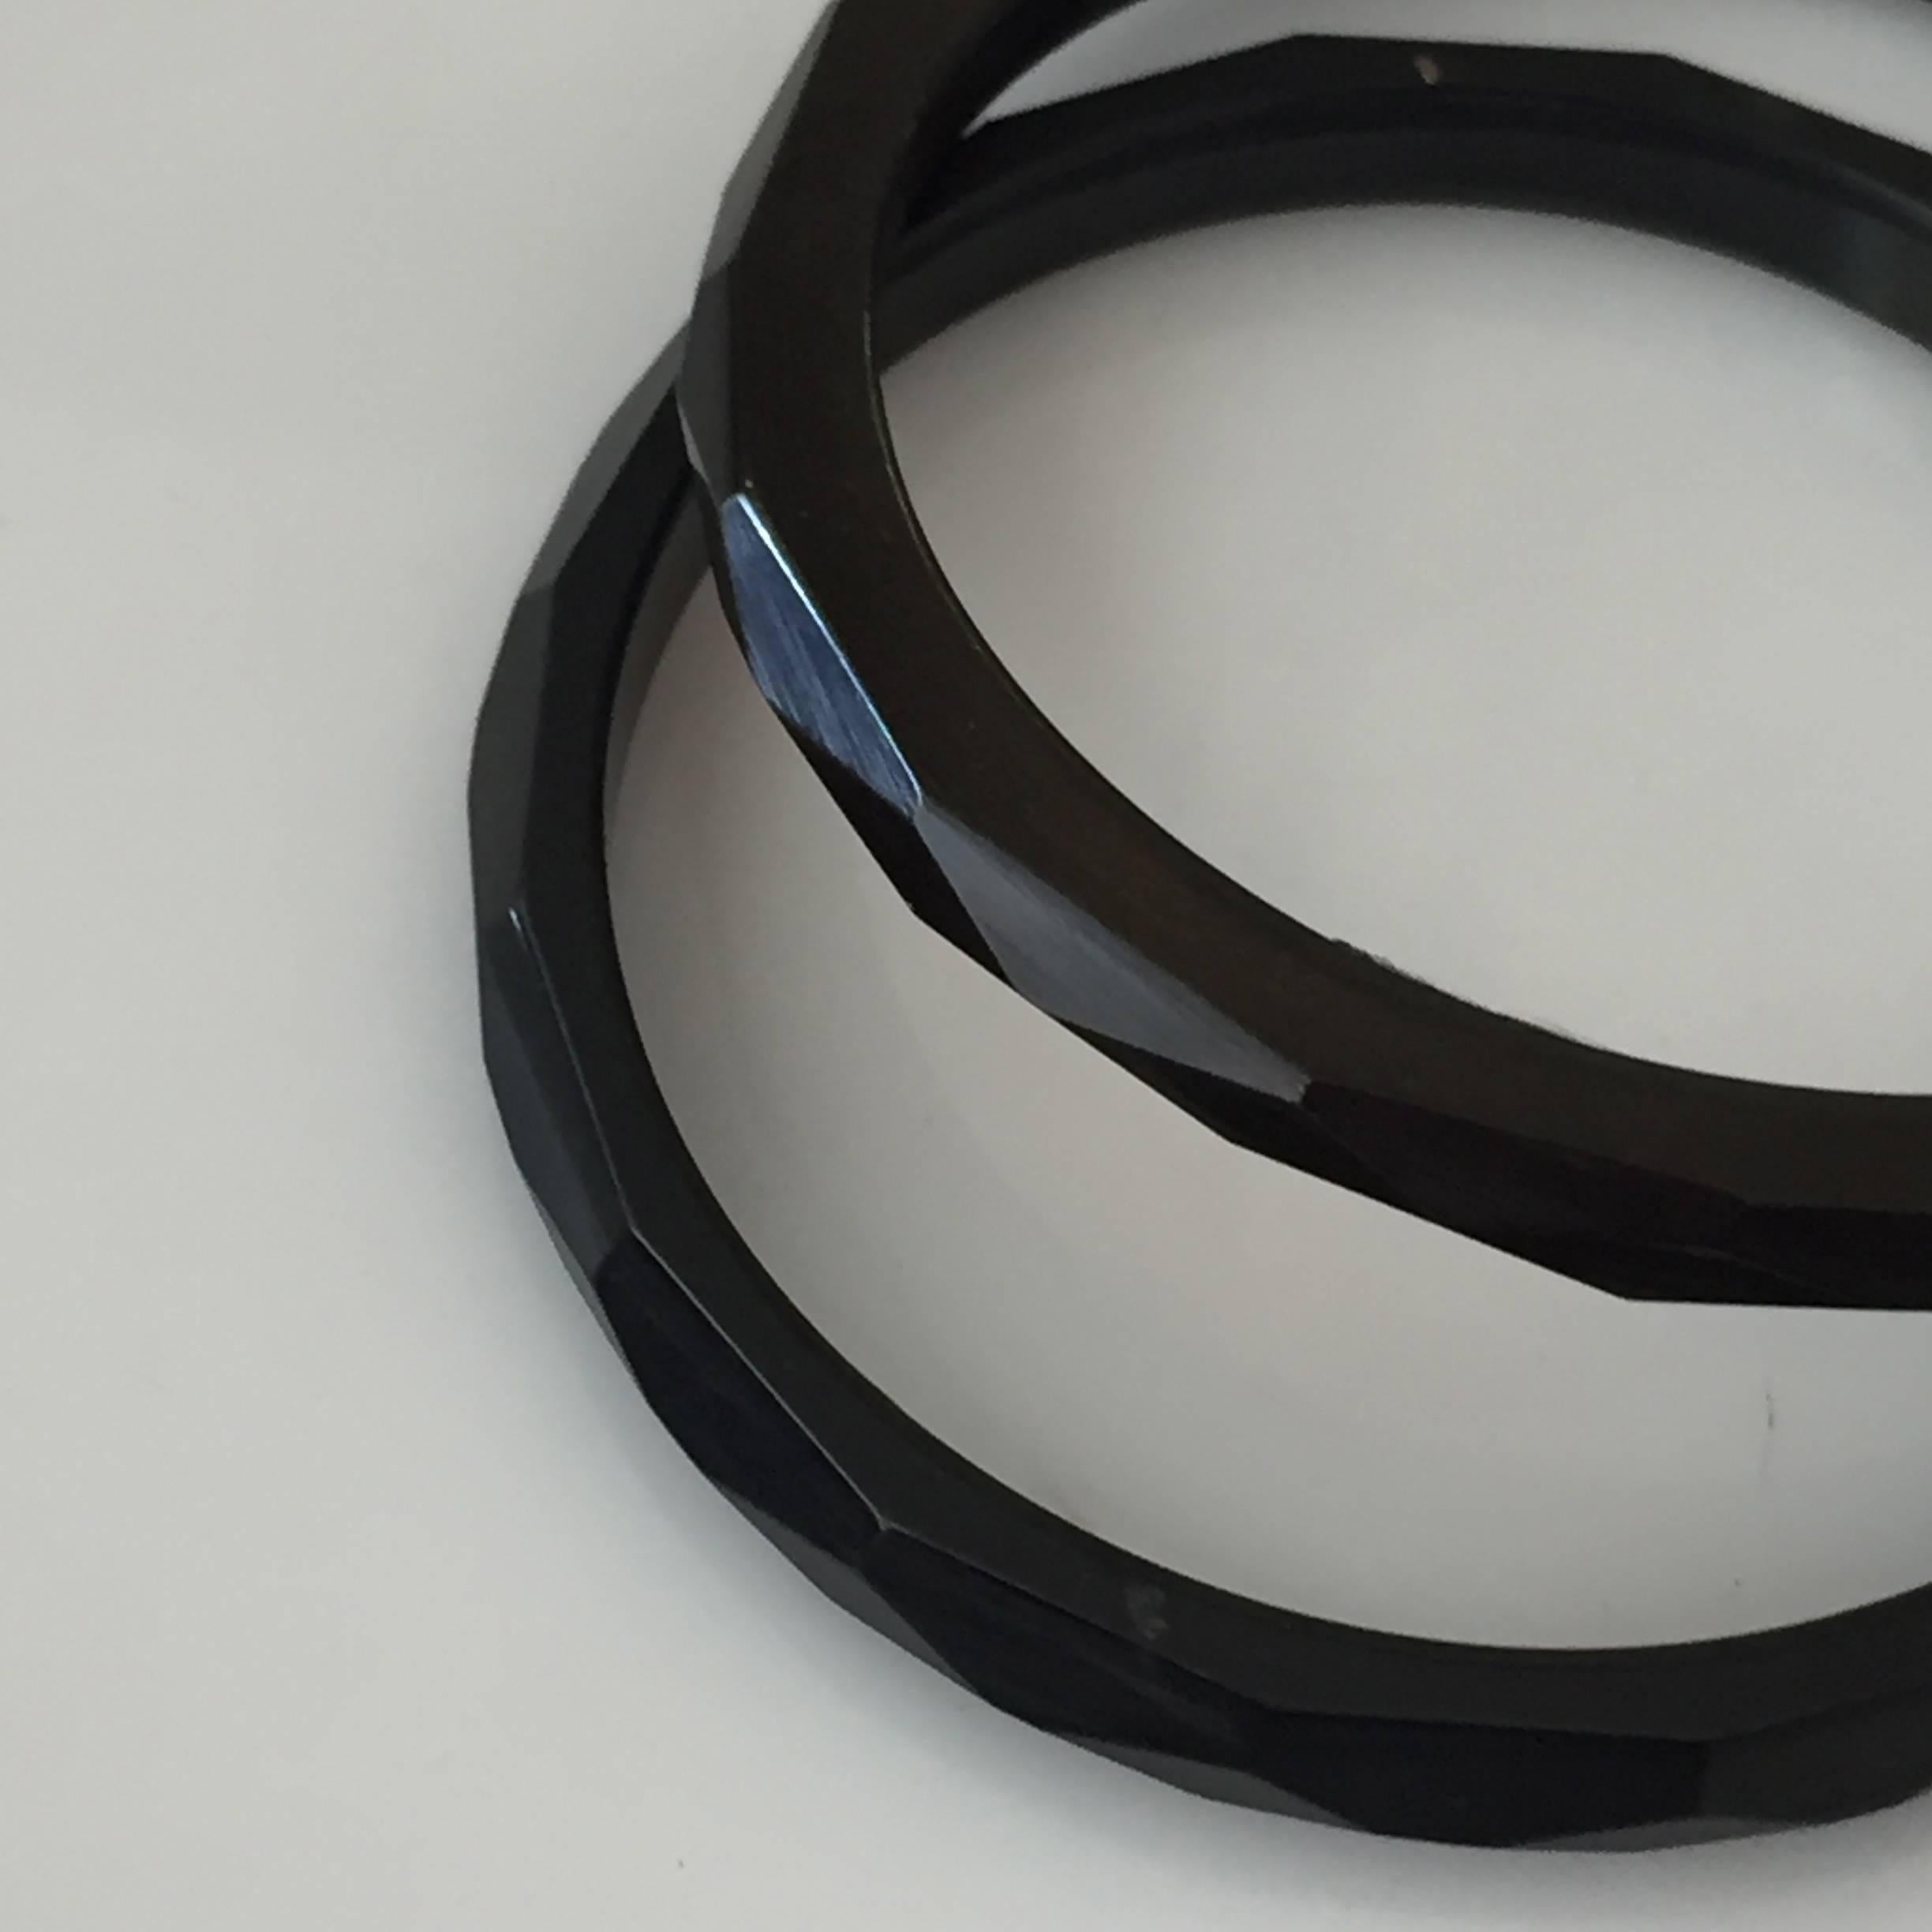 Set of two facetted black bakelite bangles with a highly polished outer rim.

2 3/8